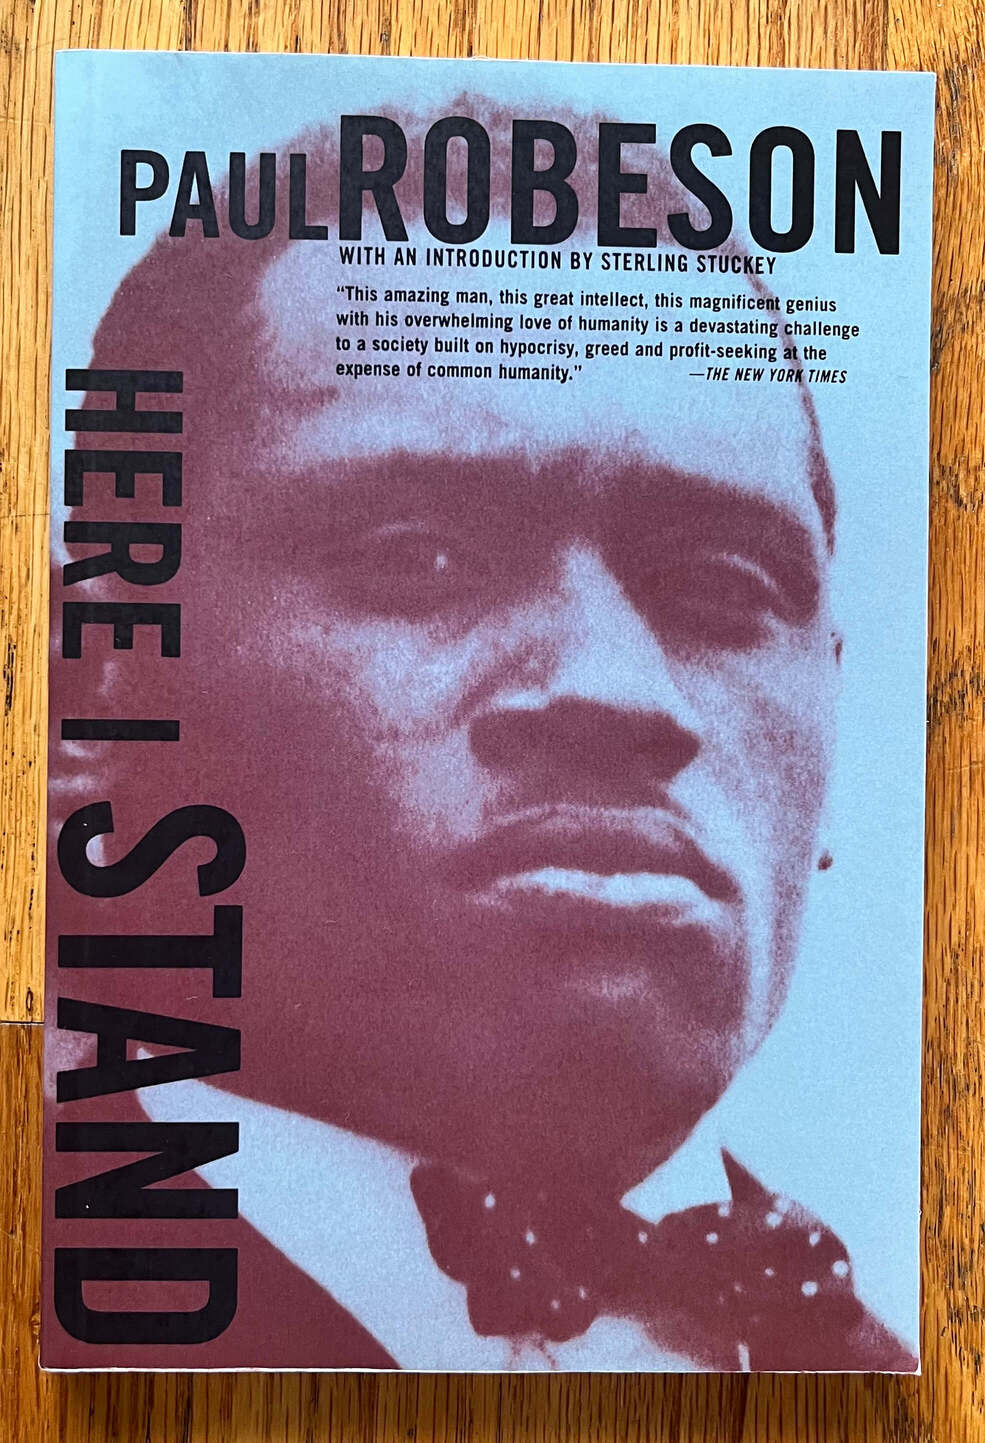 “Here I Stand” by Paul Robeson. With an Introduction by Sterling Stuckey.